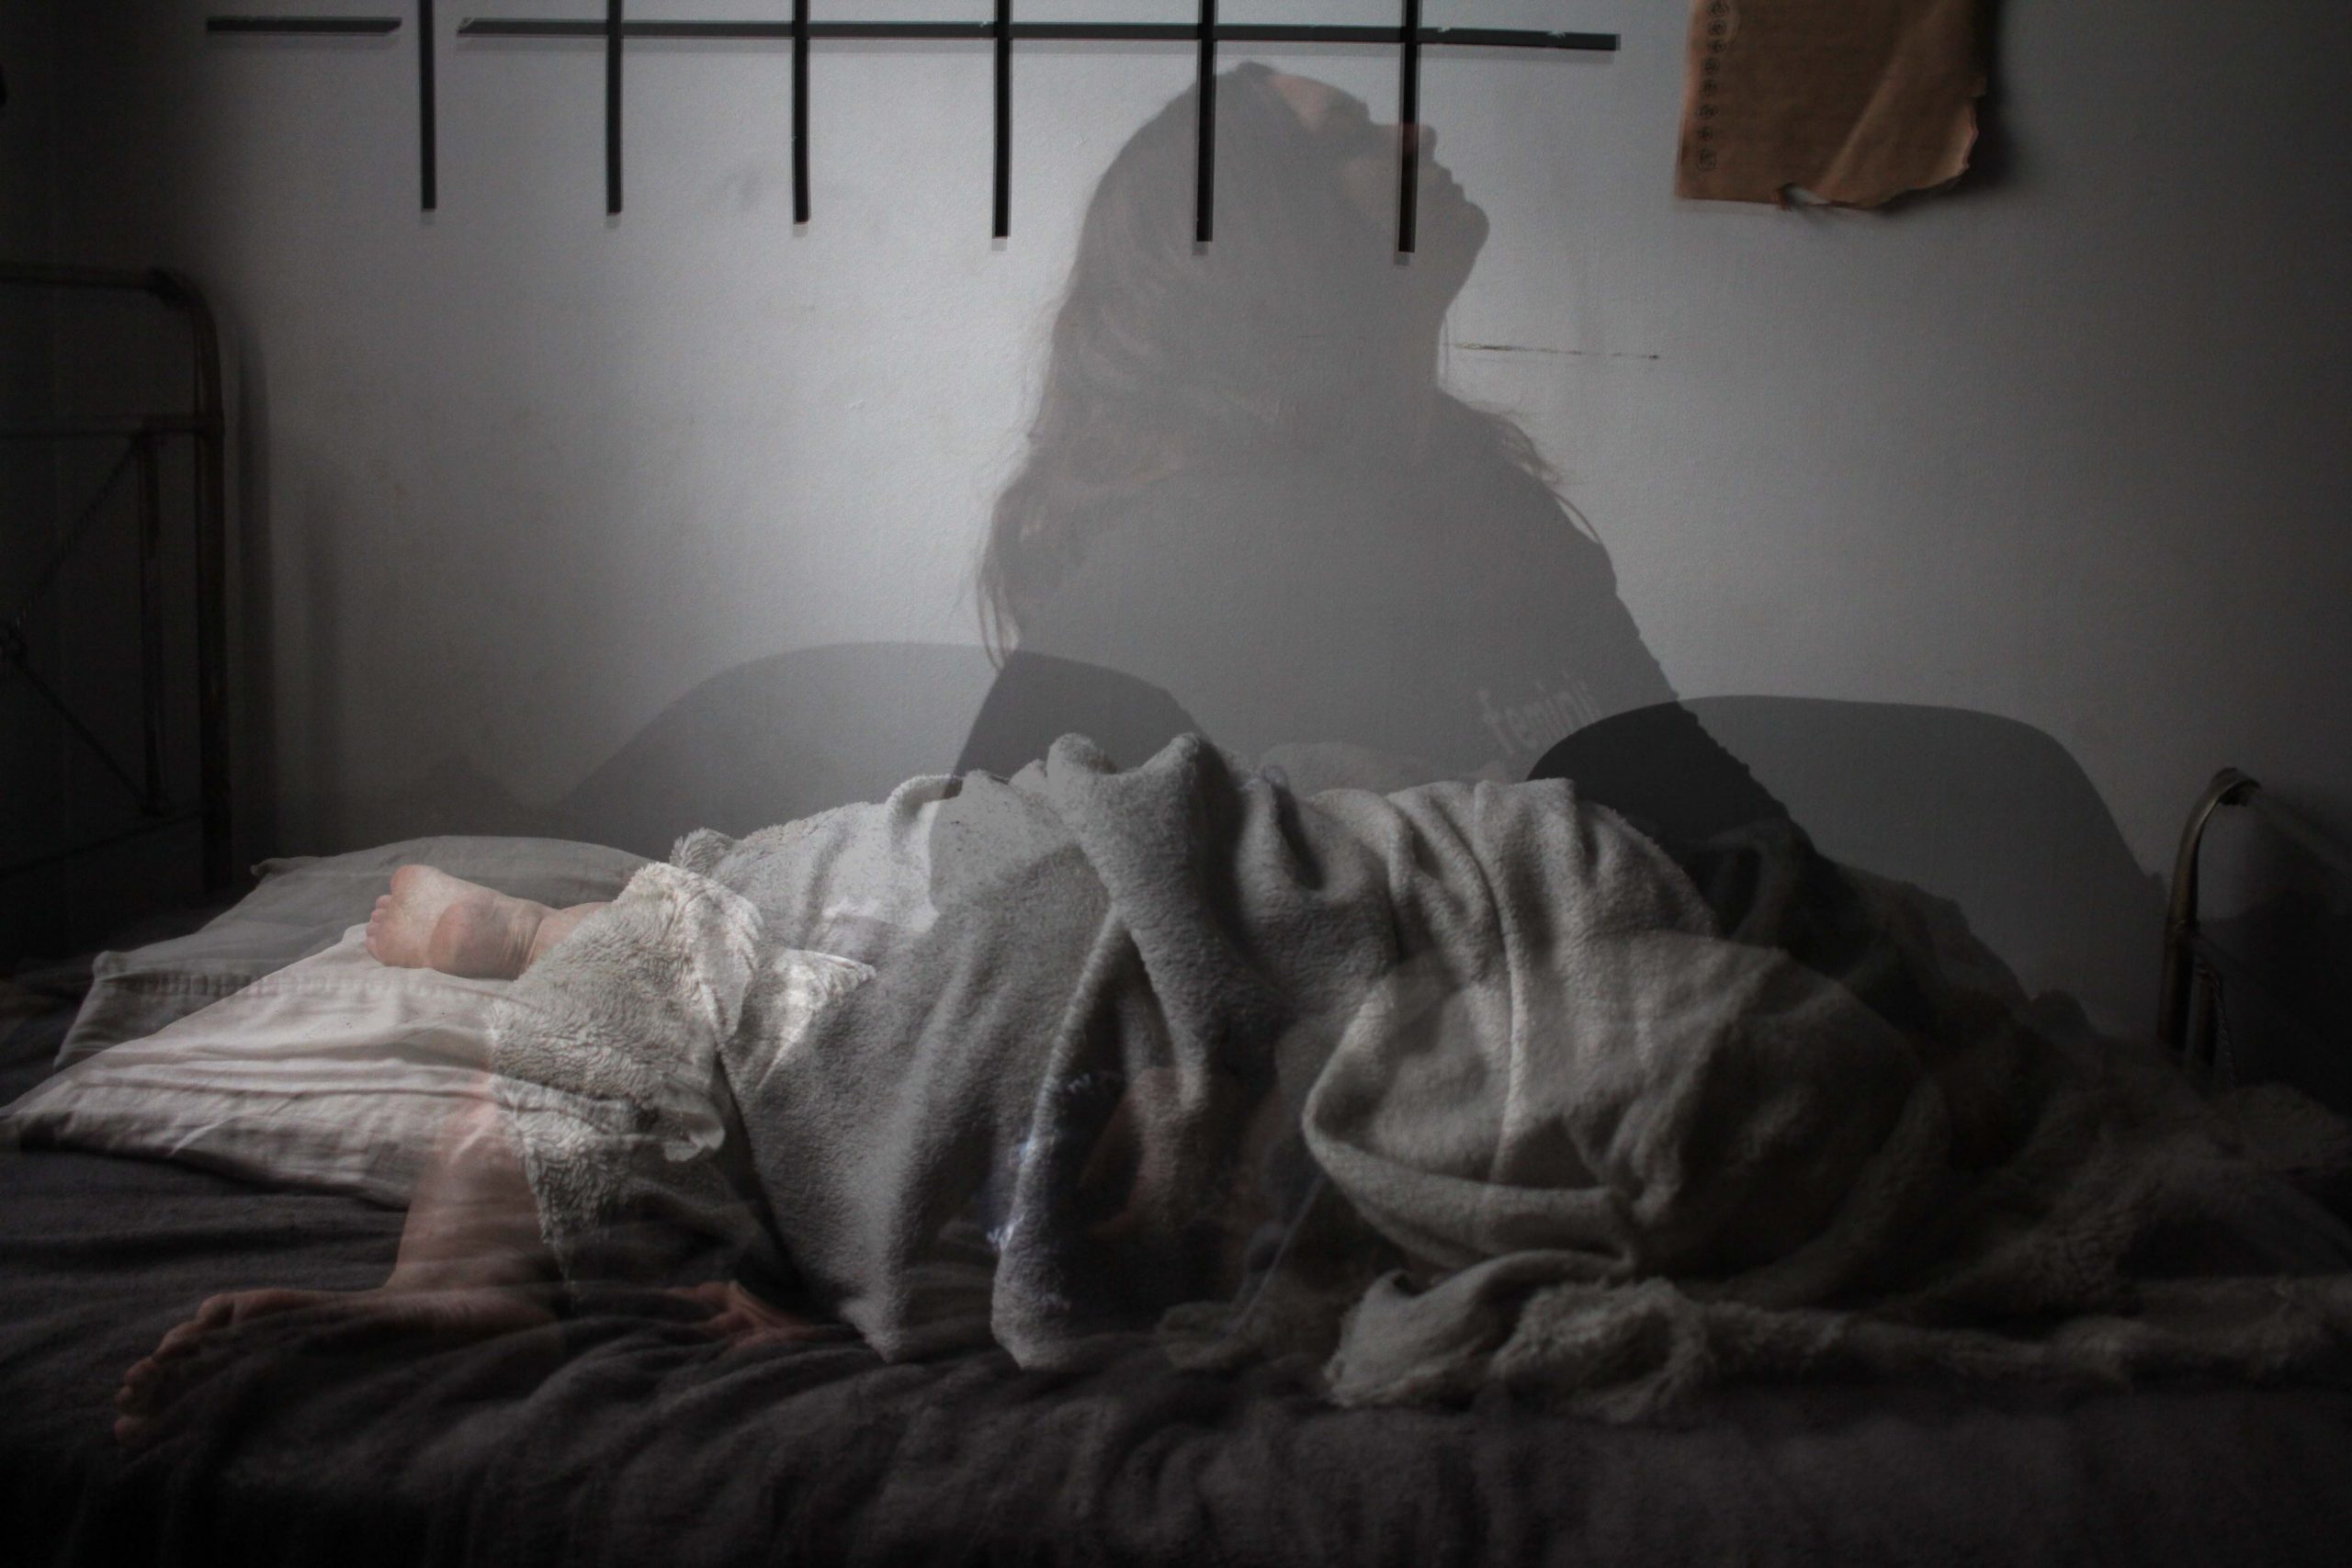 Shadow of a woman on a bed. Photo by Megan te Boekhorst on Unsplash